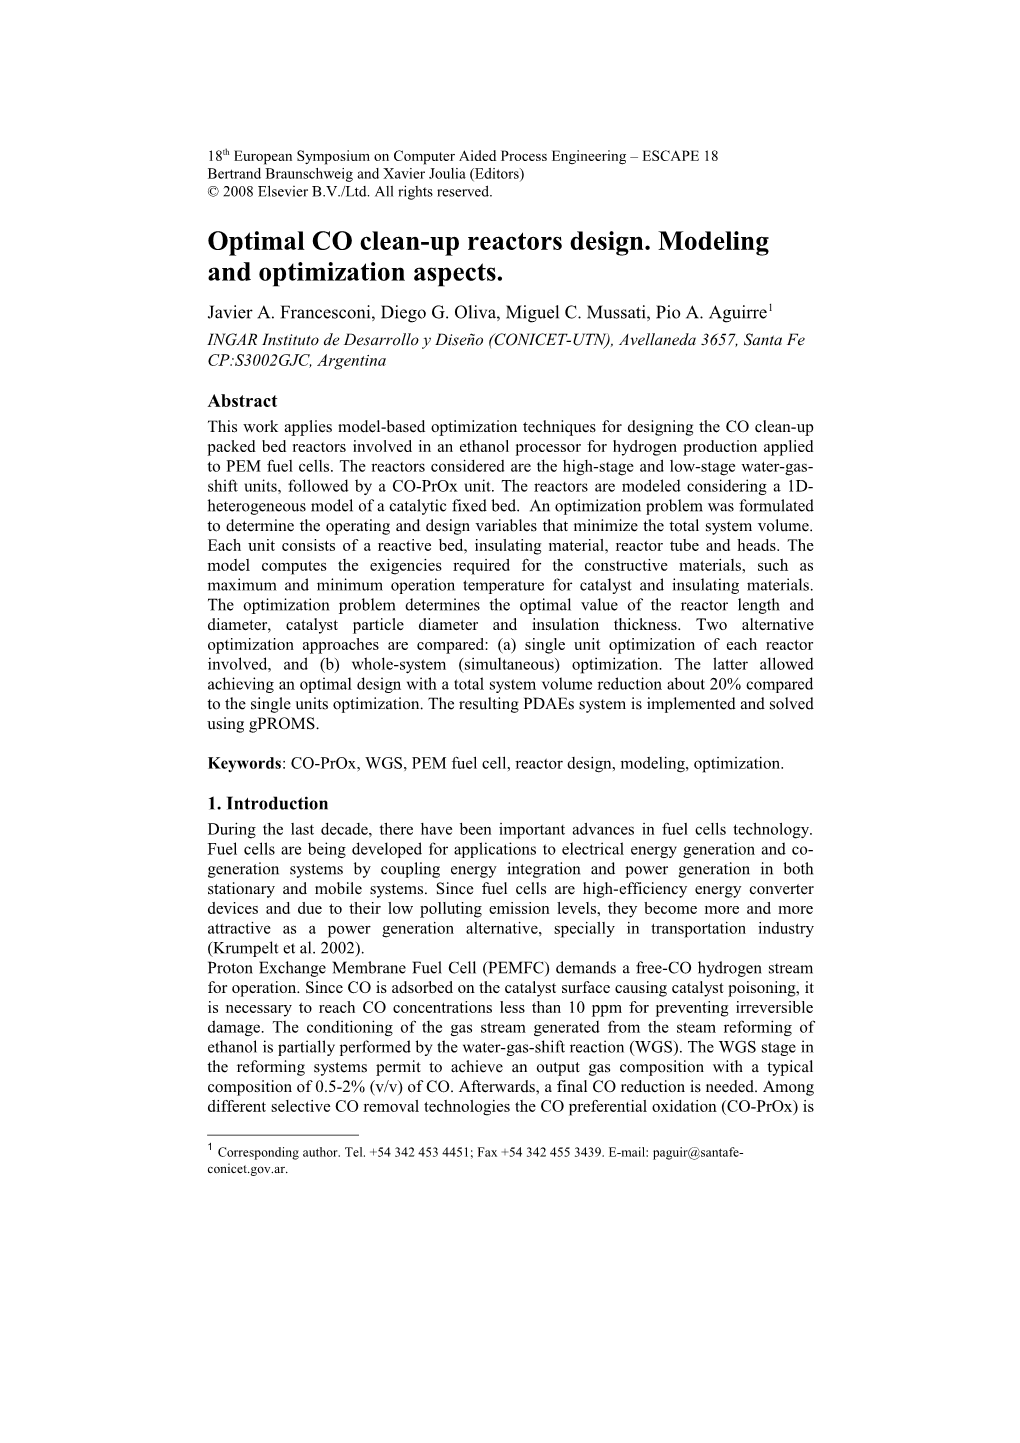 Optimal CO Clean-Up Reactors Design. Modeling and Optimization Aspects